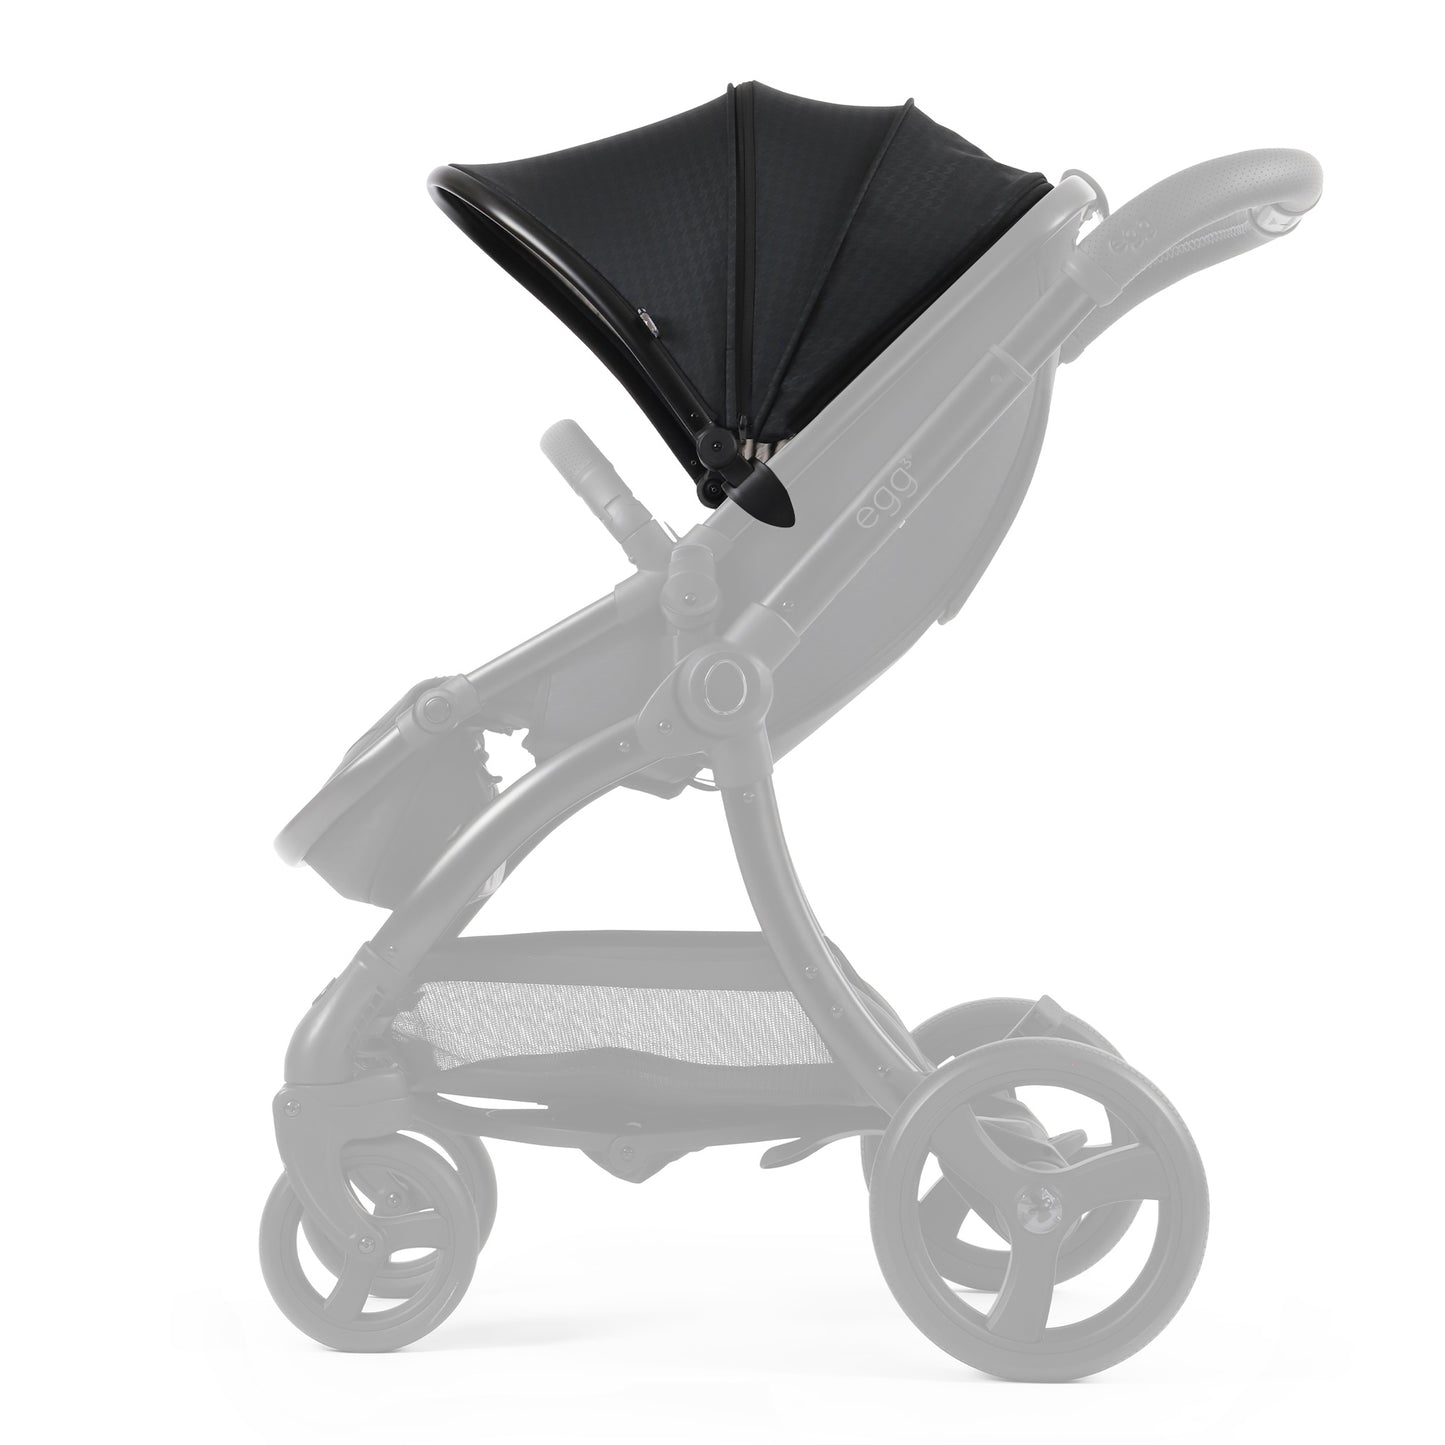 Spare Parts - egg3 Stroller Canopy